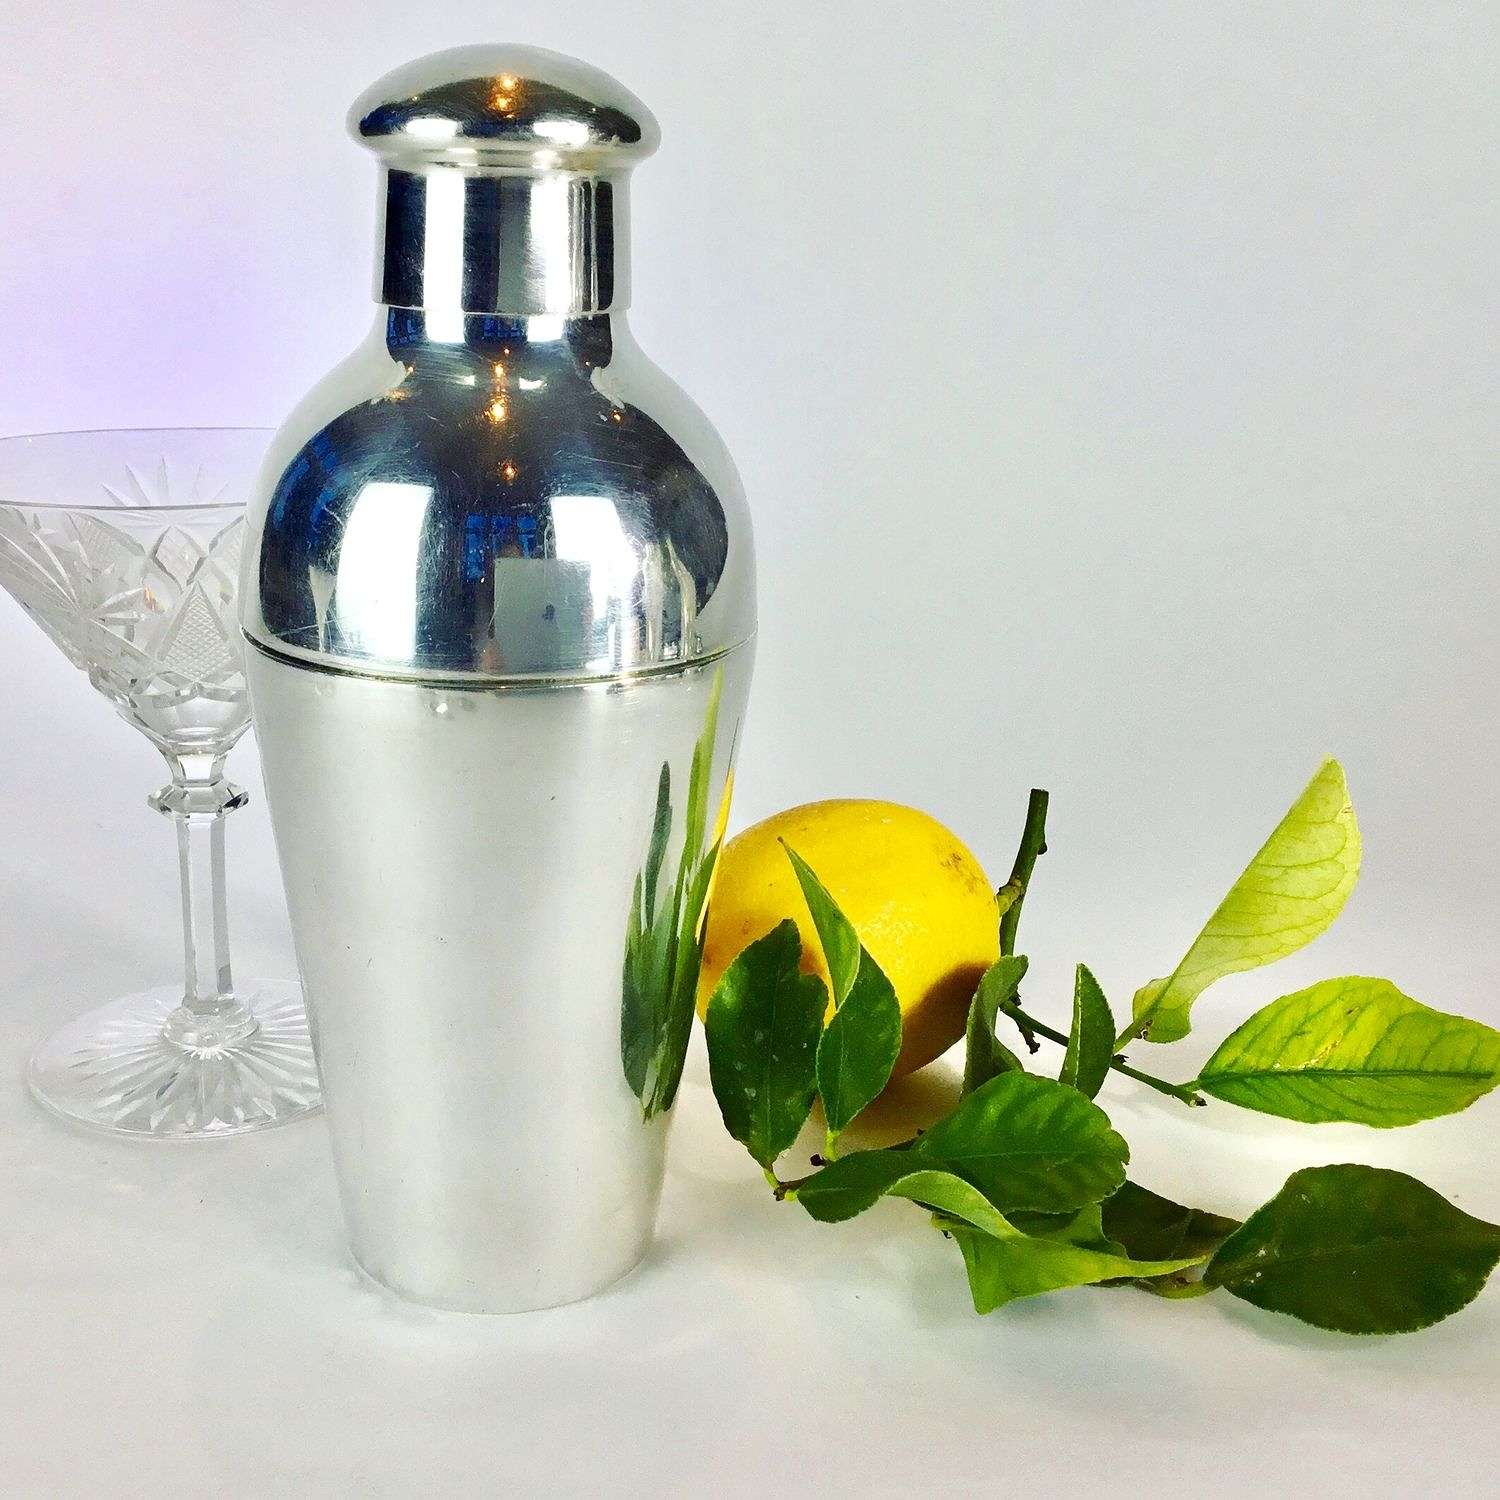 Wiskemann silver plated cocktail shaker Circa 1930s